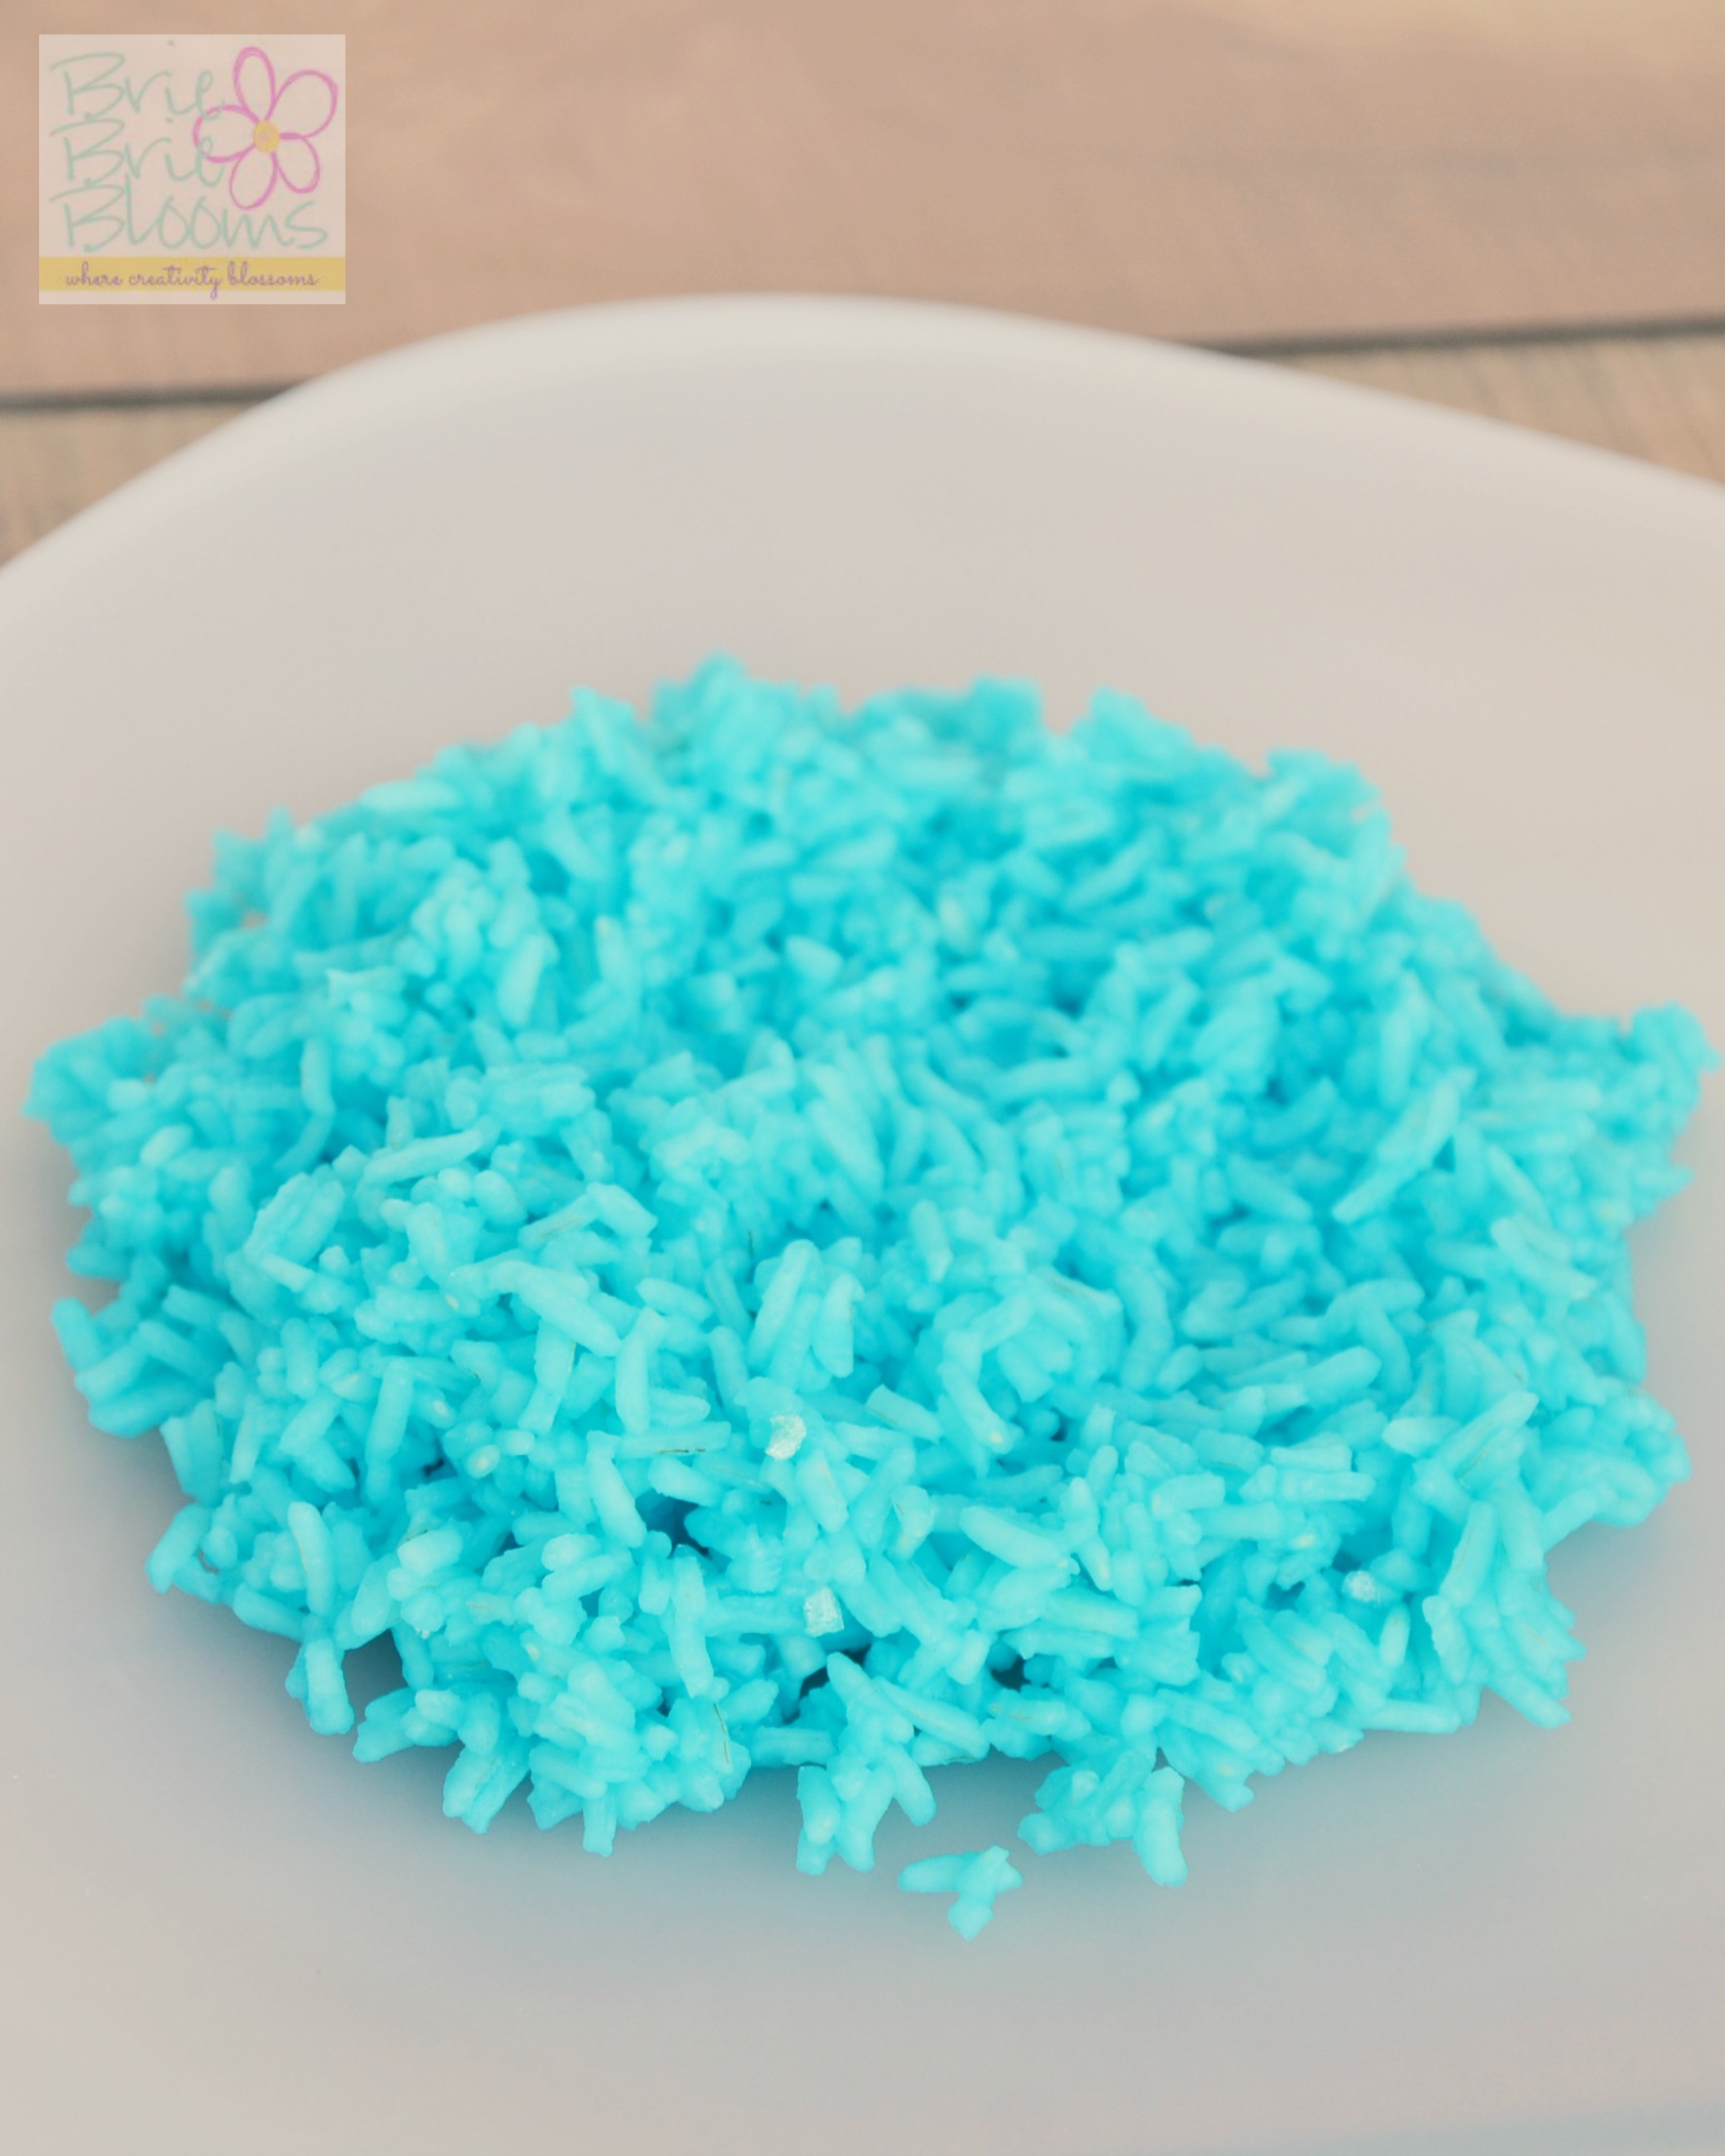 The-Pirate-Fairy-blue-pixie-dust-rice